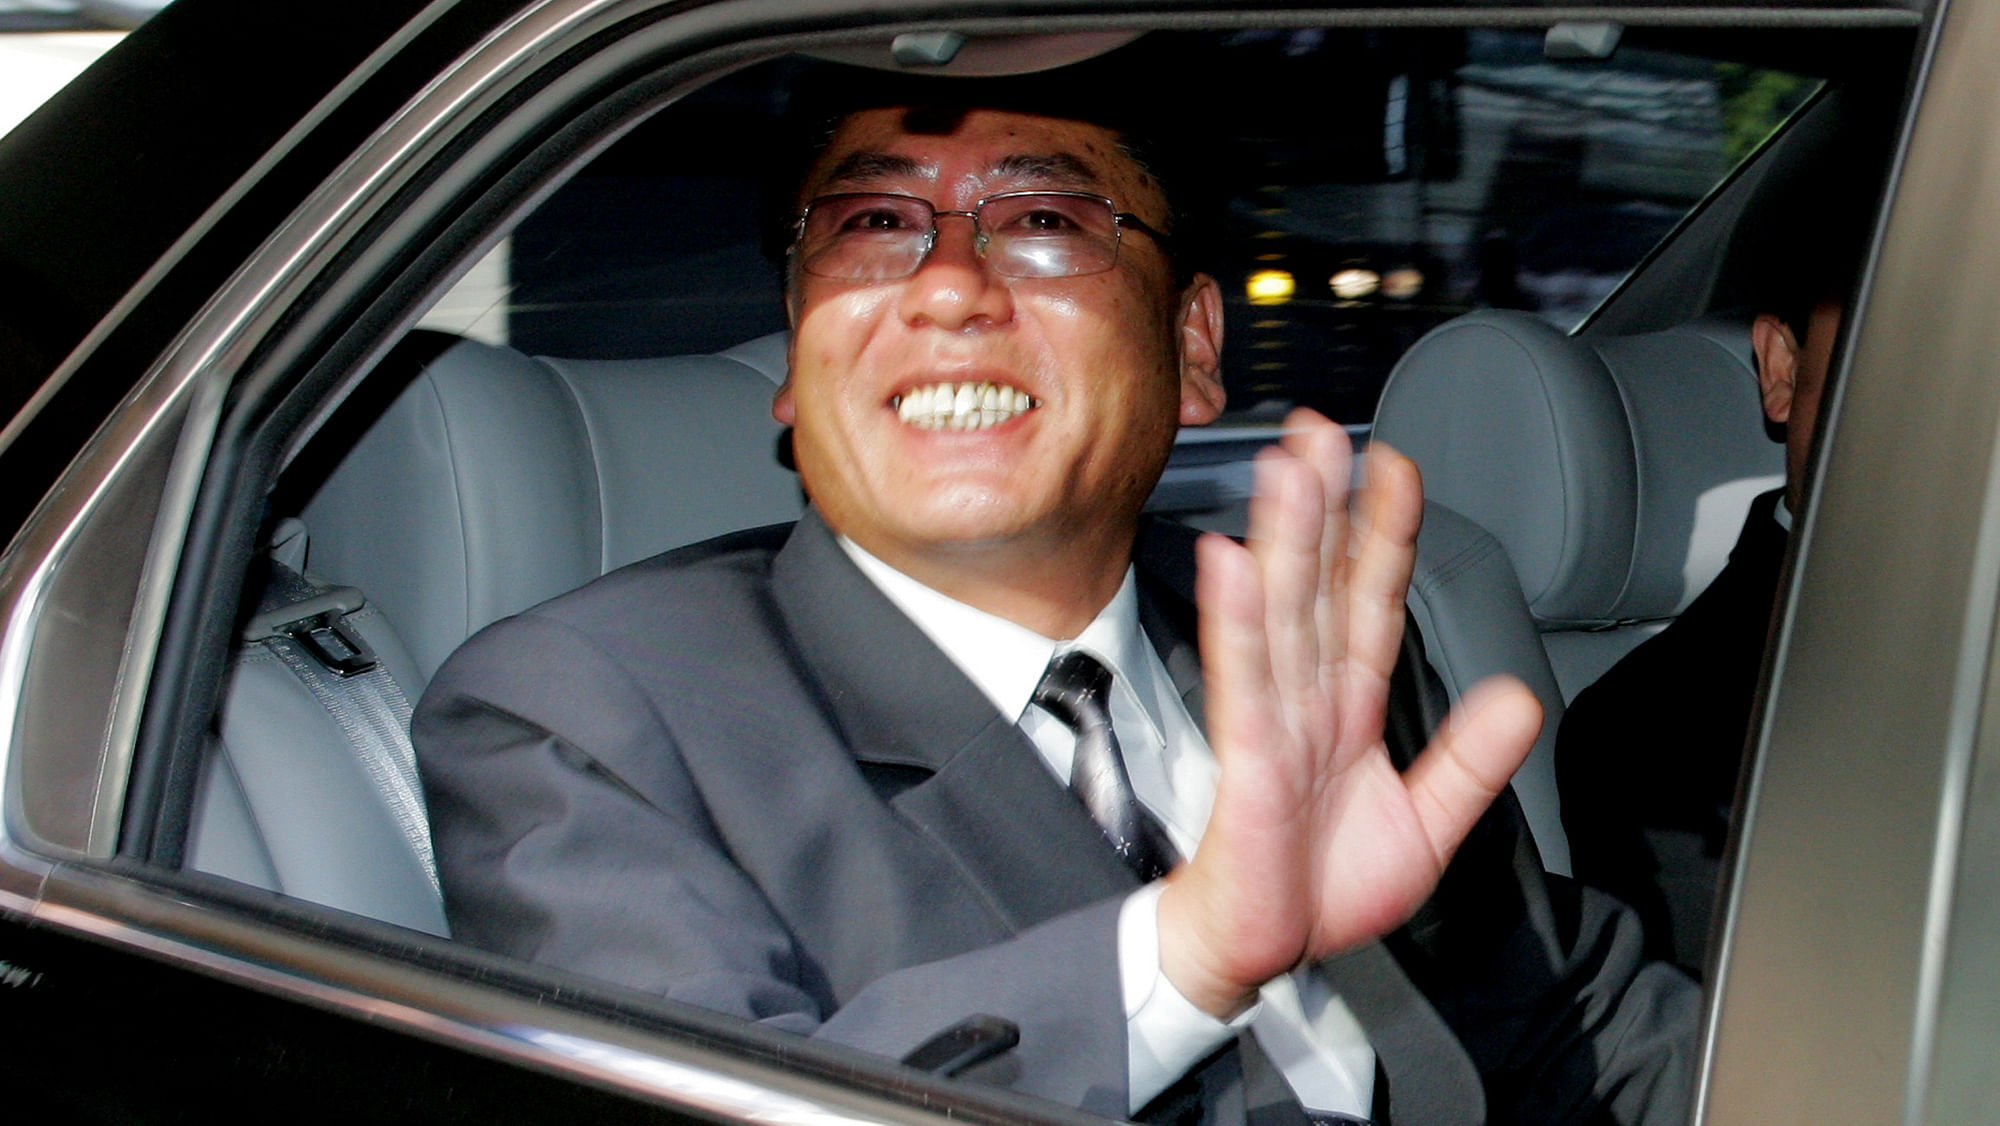 File photo of Choe Yong-gon, North Korea’s Vice Premier. He is seen waving to a South Korean delegation on returning after the inter-Korean economic talks in Seoul. (Photo: Reuters)